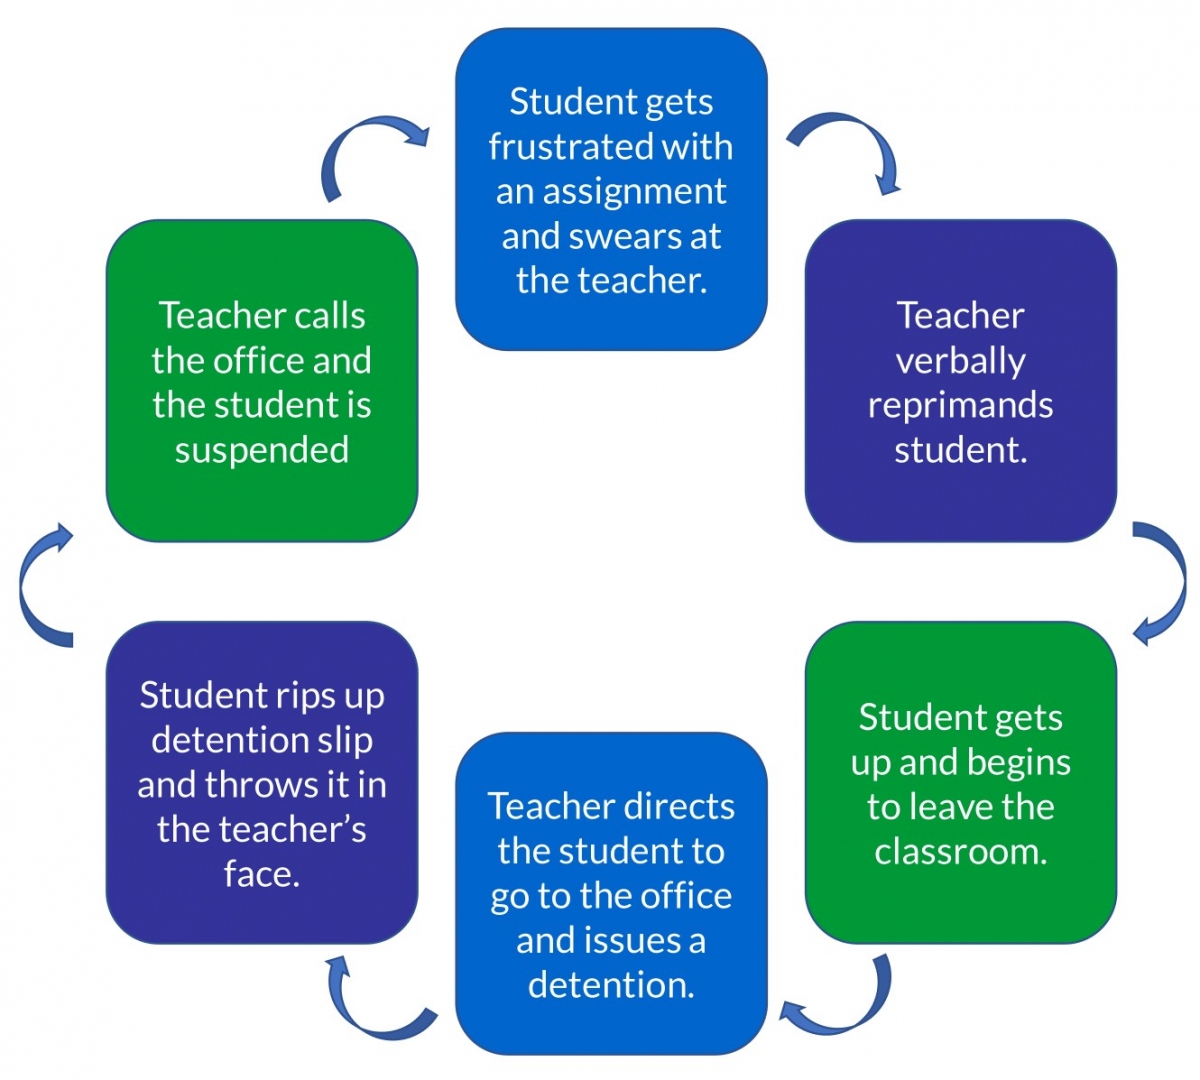 PBIS Cycle Graphic 1. A series of events separated by arrows. 1. Student gets frustrated with an assignment and swears at the teacher. 2. Teacher verbally reprimands the student. 3. Student gets up and begins to leave the classroom. 4. Teacher directs student to go to the office and issues a detention. 5. Student rips up detention slip and throws it in the teacher's face. 6. Teacher calls the office and student is suspended.